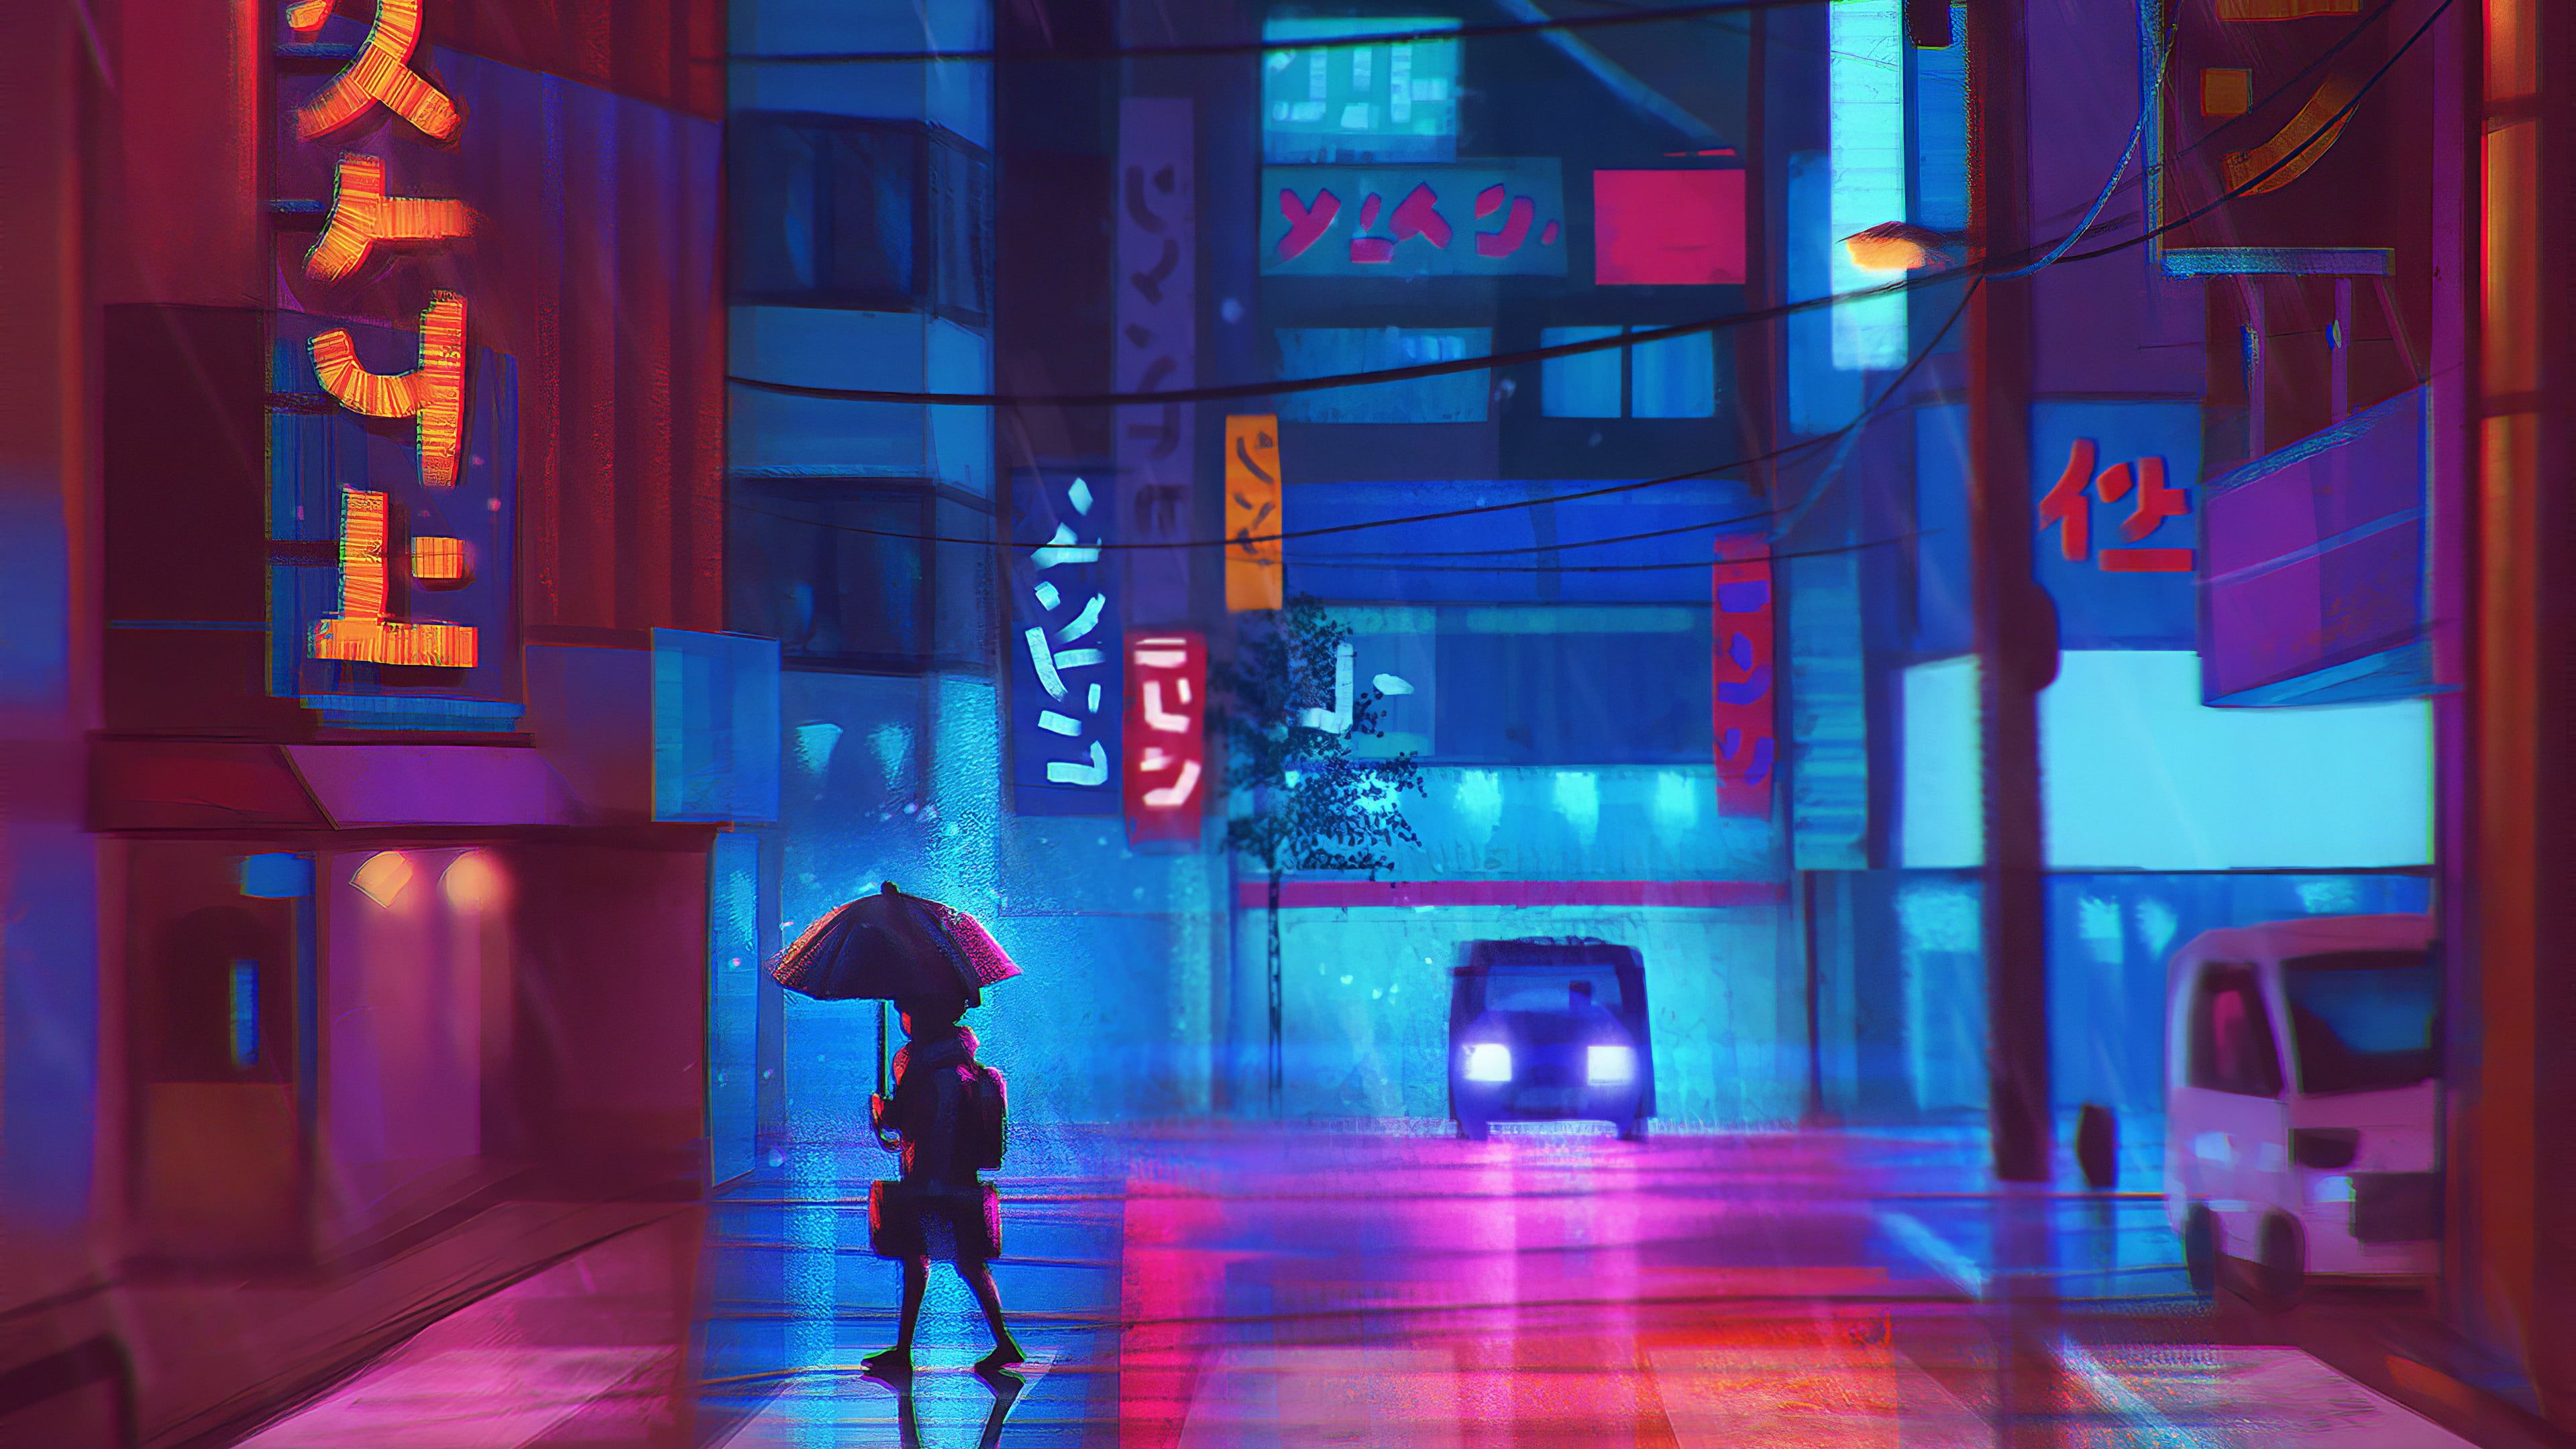 Anime City Neon 4k Wallpapers Wallpaper Cave